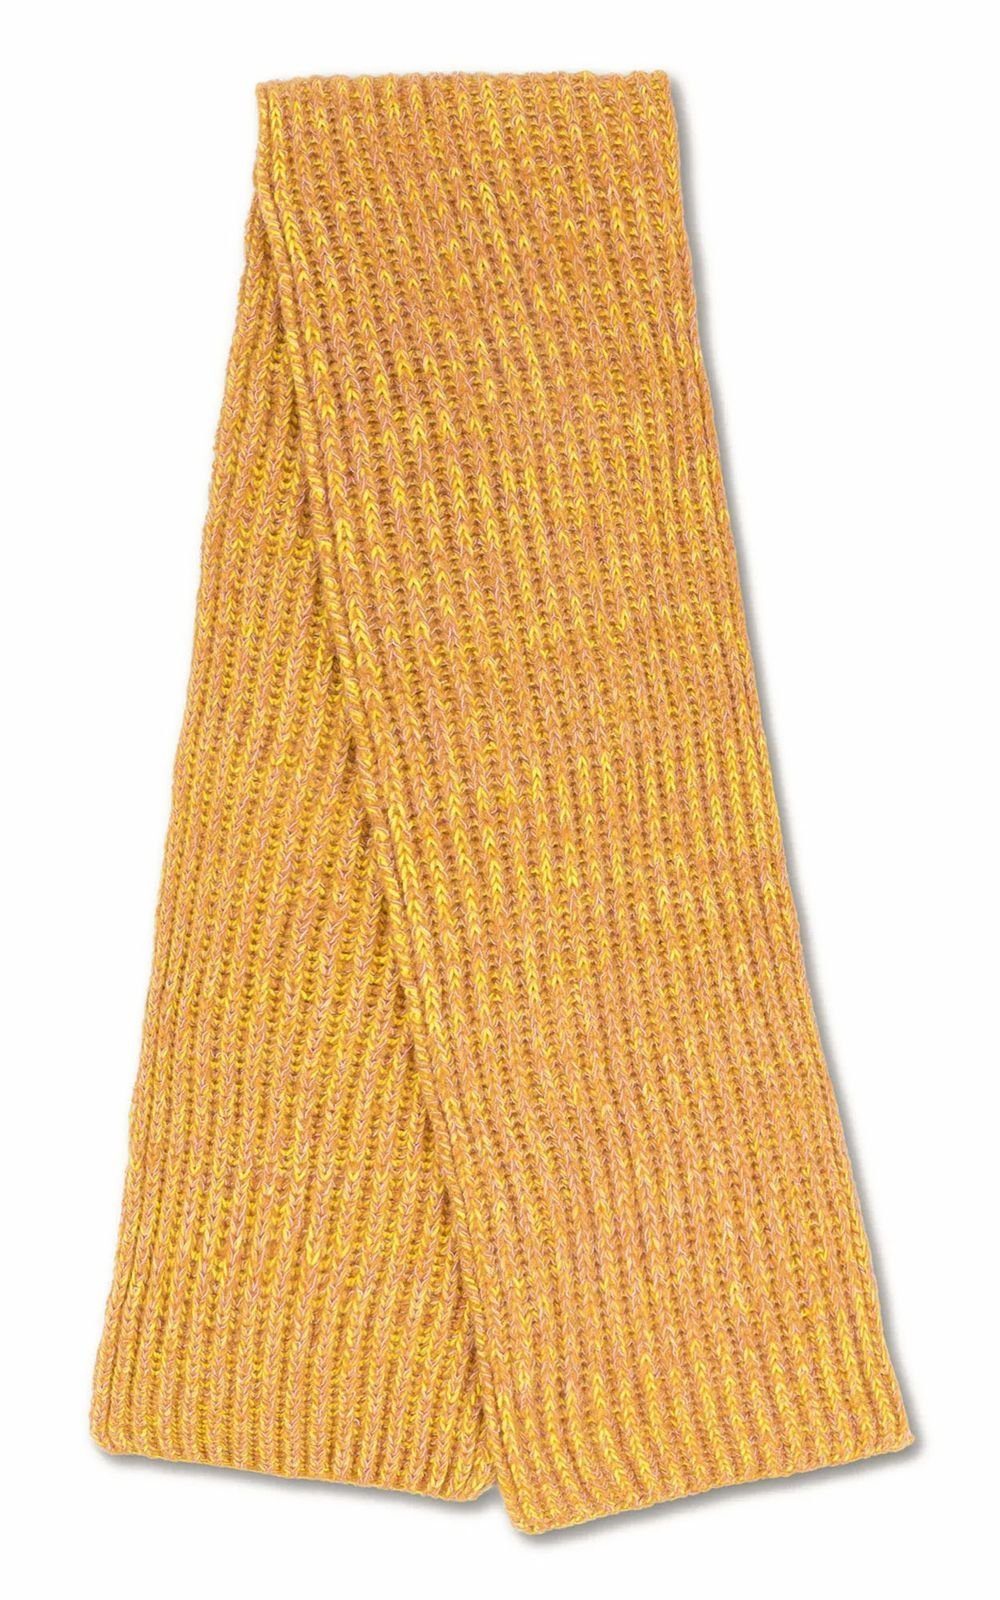 Safety Modeschal Yellow Tweed Oilily